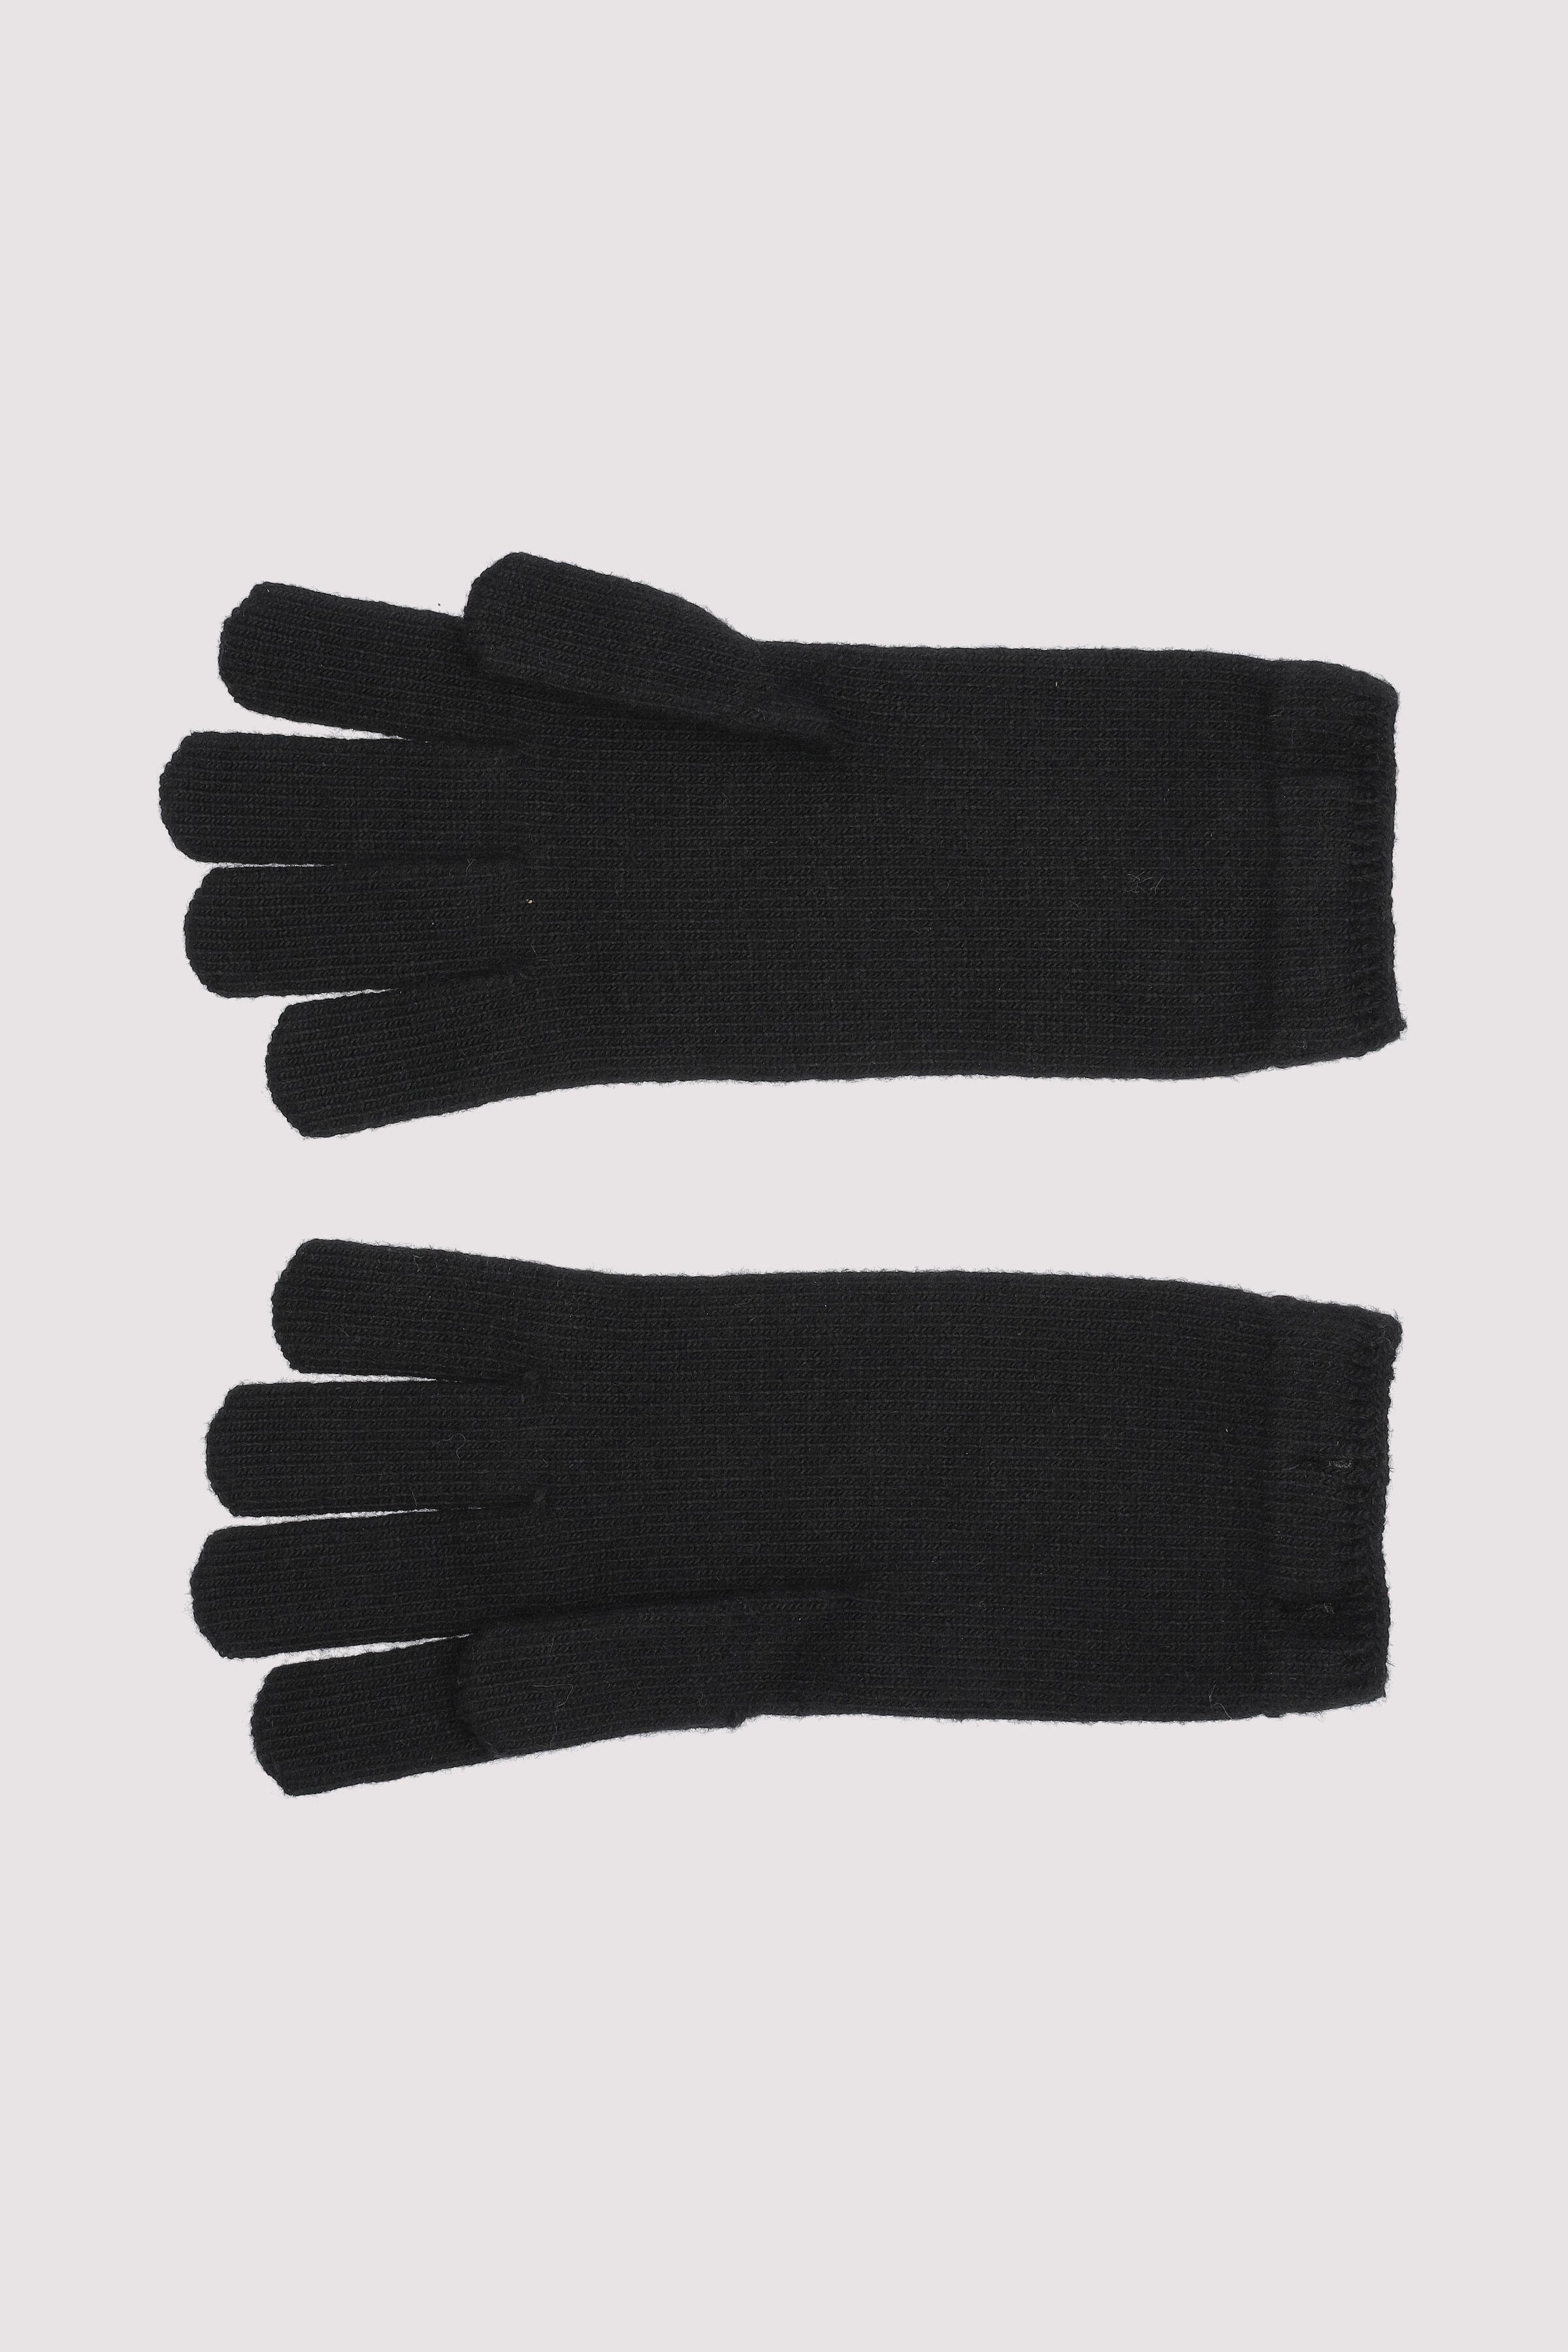 LIMITLESS CHIC WOOL GLOVES